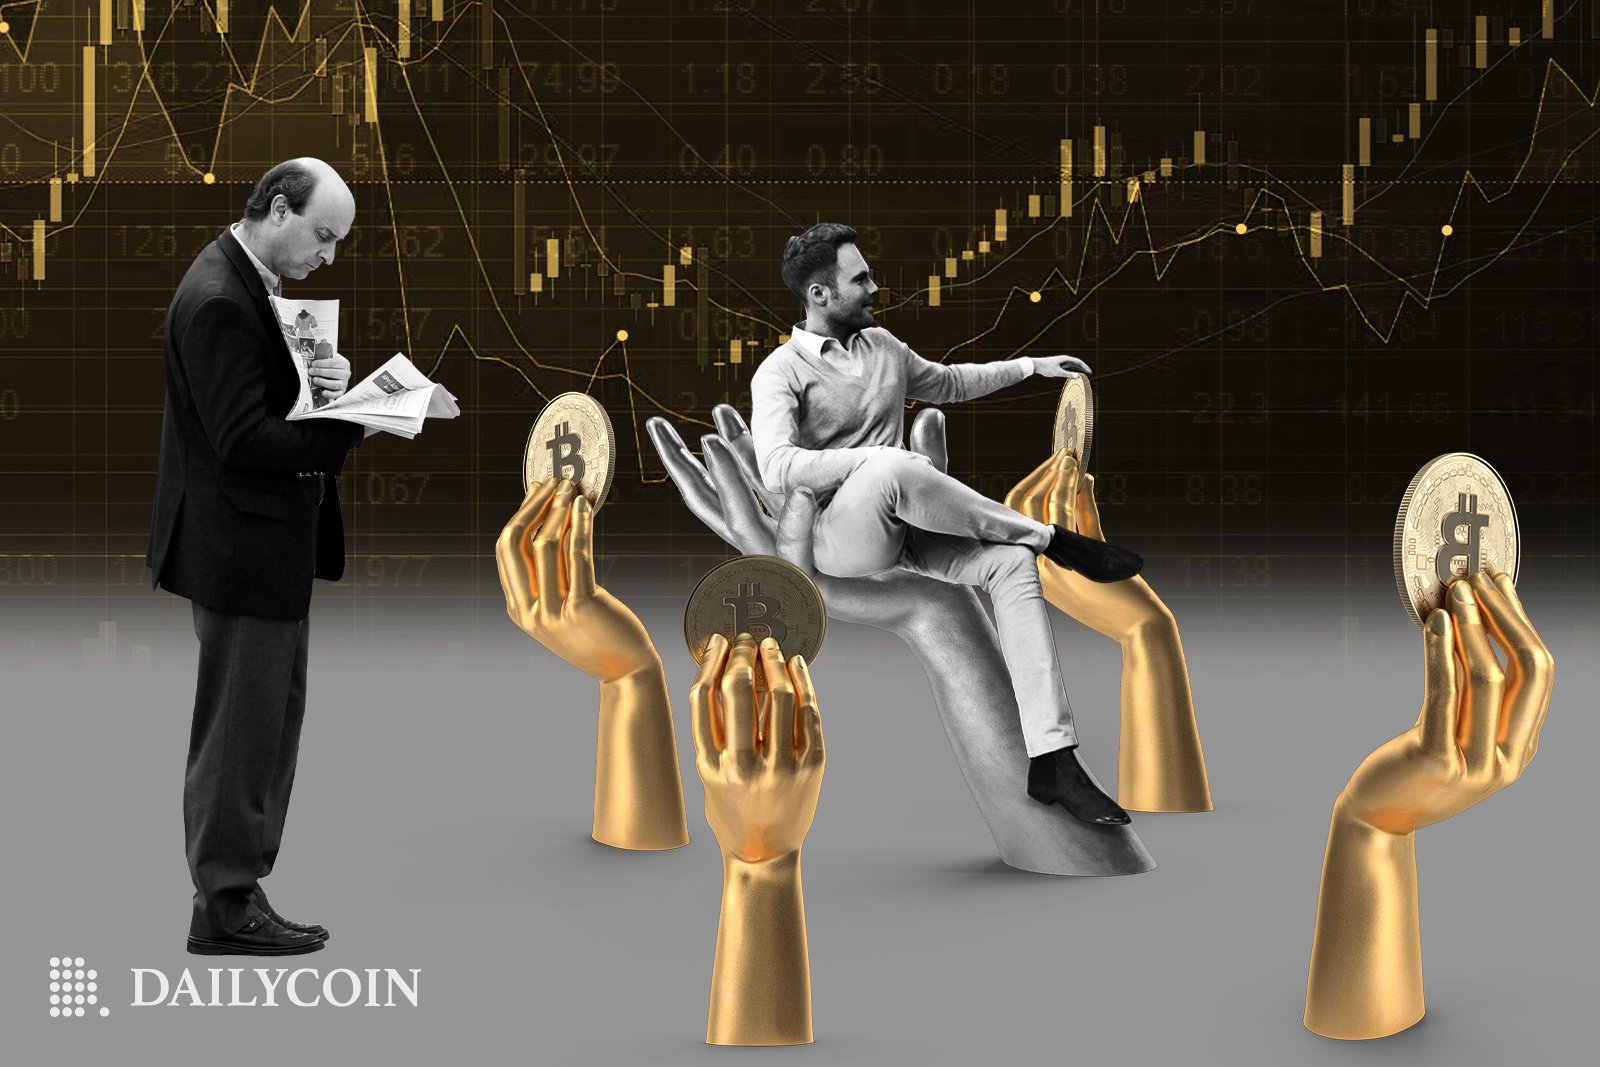 An analyst is analyzing a golden statue human hands holding Bitcoin BTC and a man sitting at the center.